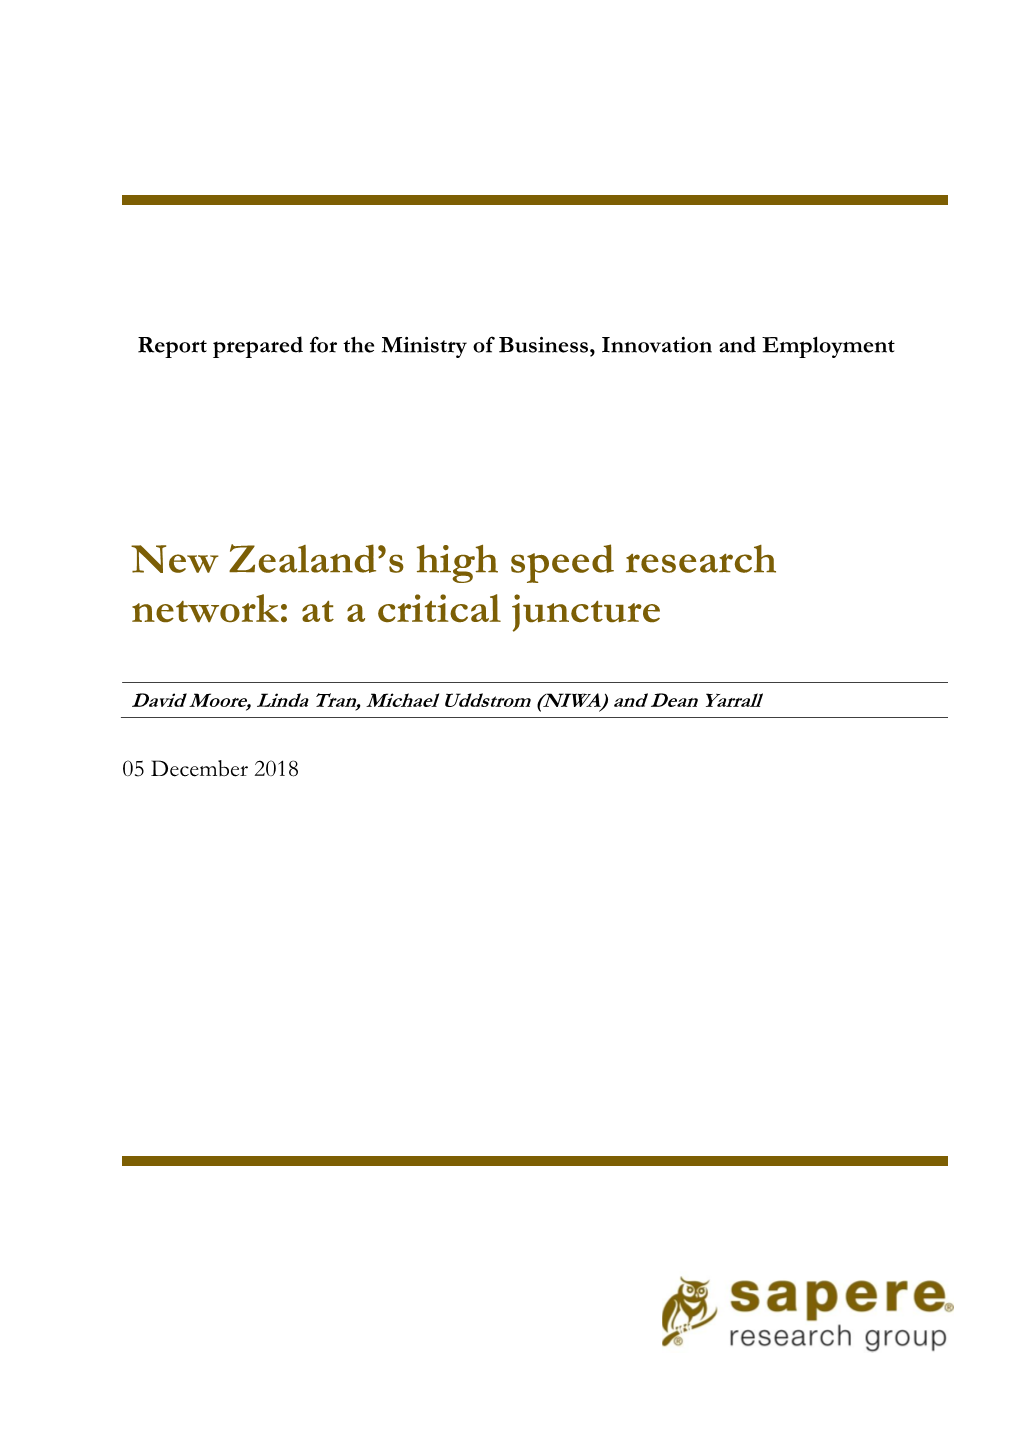 New Zealand's High Speed Research Network